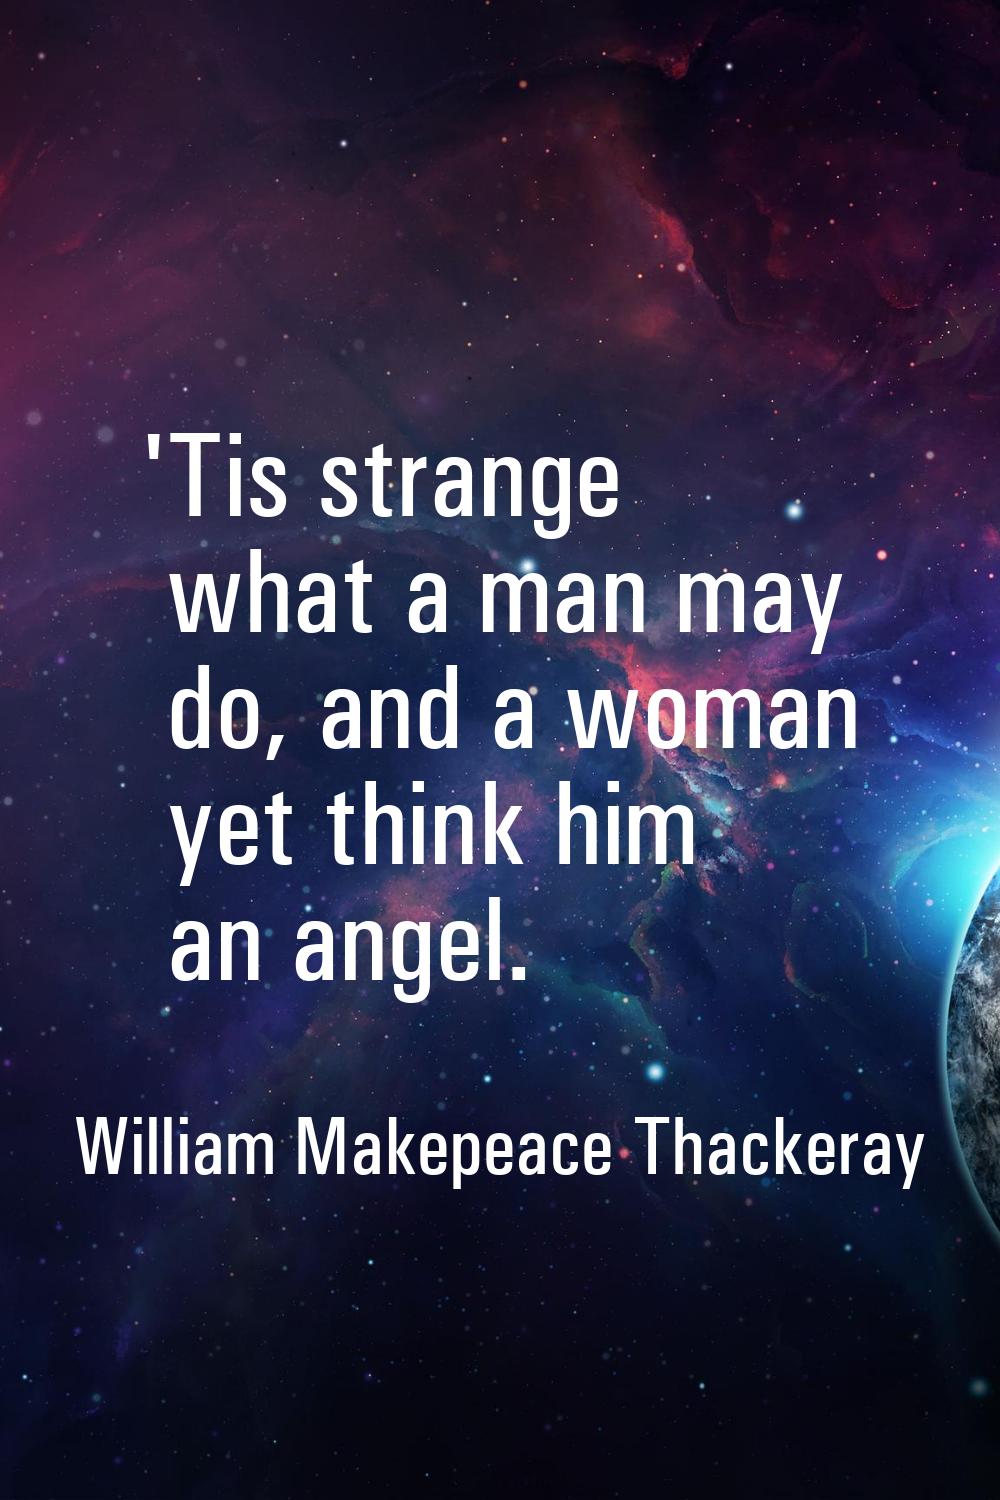 'Tis strange what a man may do, and a woman yet think him an angel.